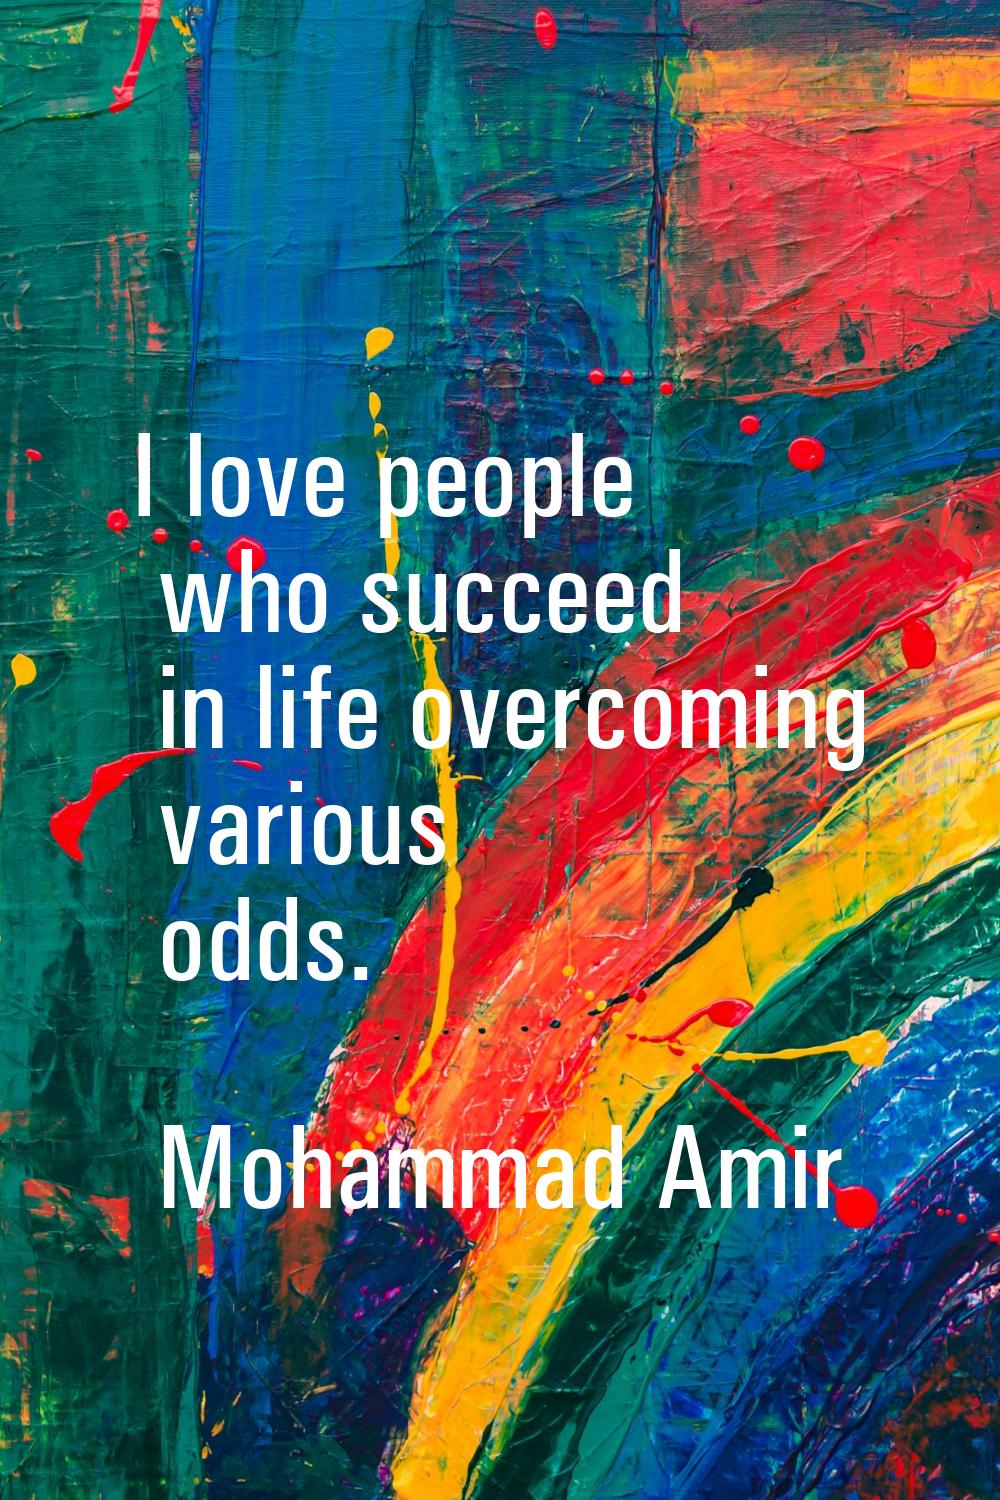 I love people who succeed in life overcoming various odds.